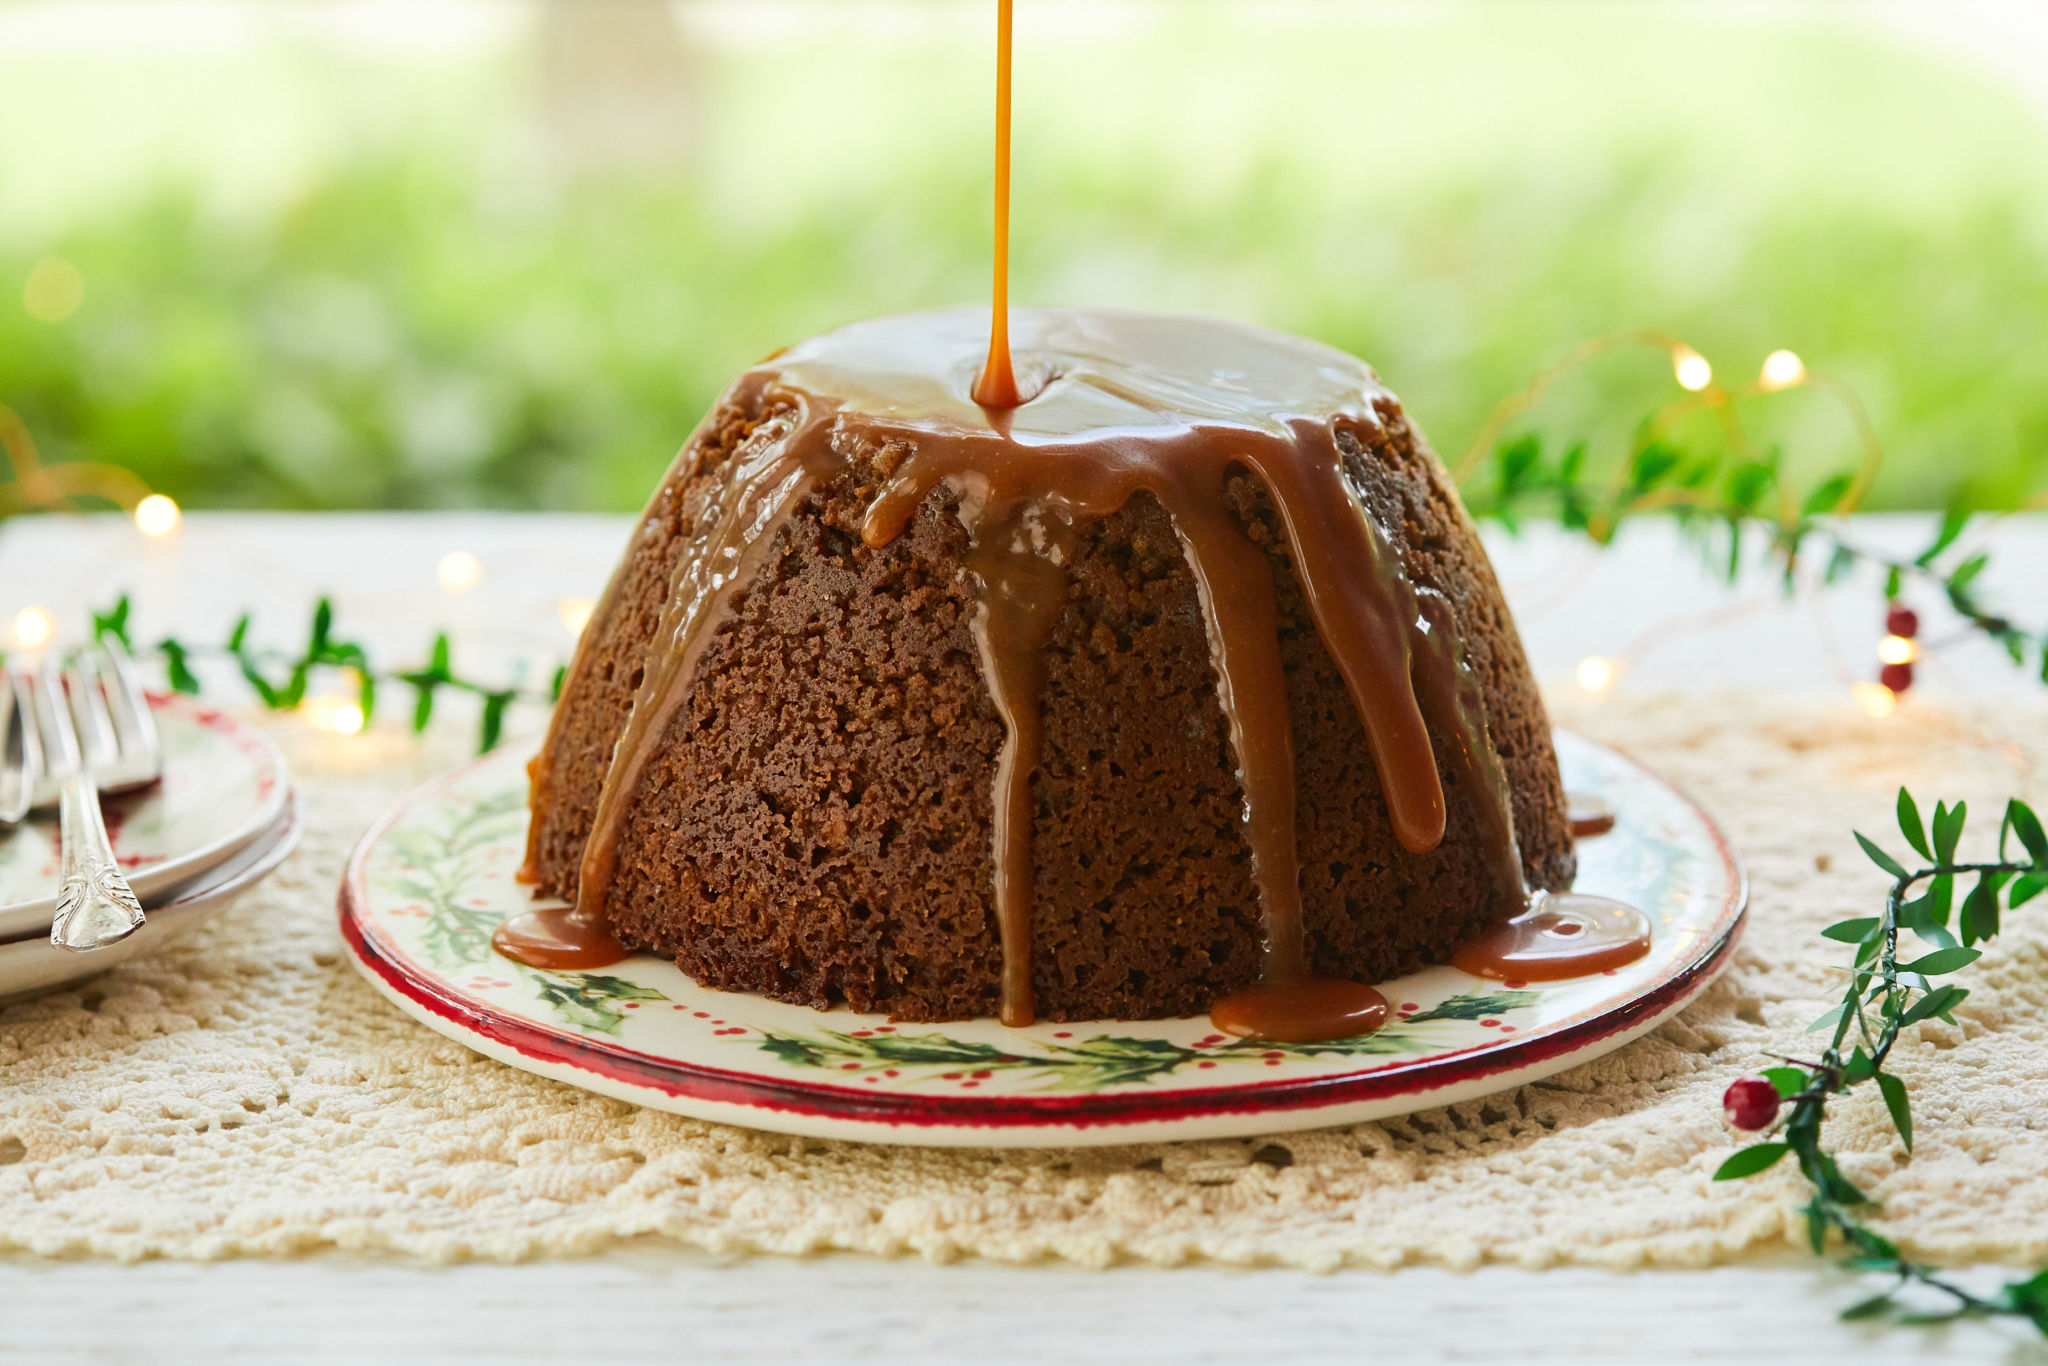 A steamed gingerbread pudding being drizzled with rum sauce.